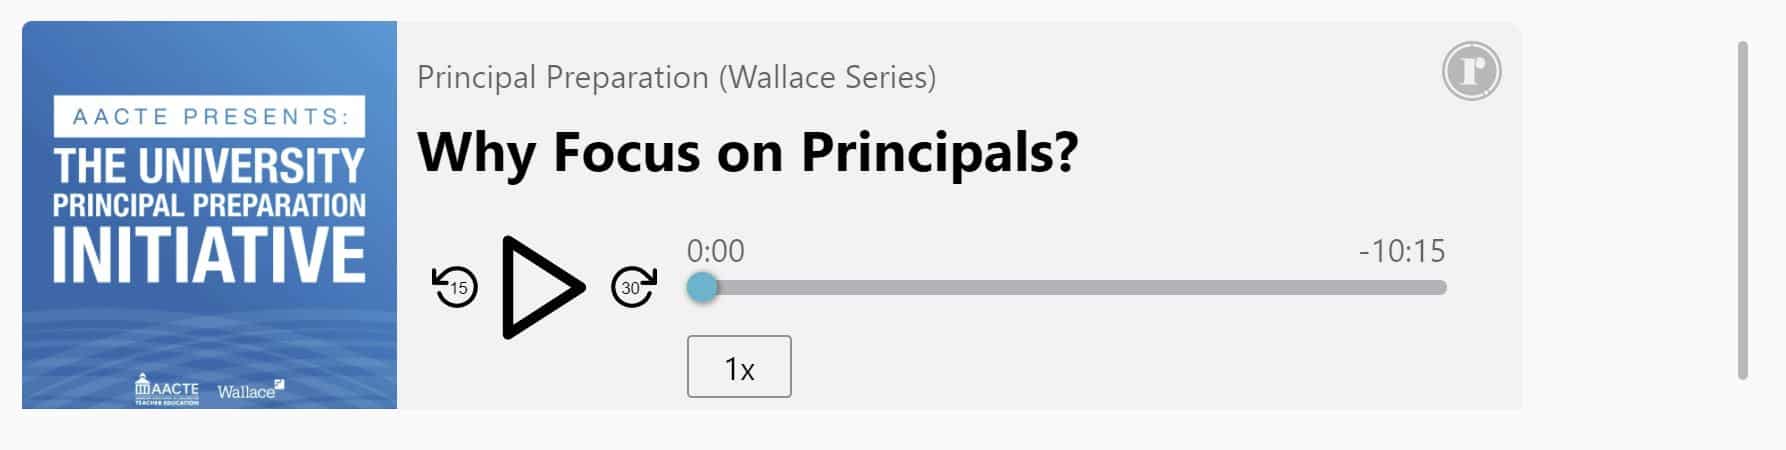 Why Focus on Principals